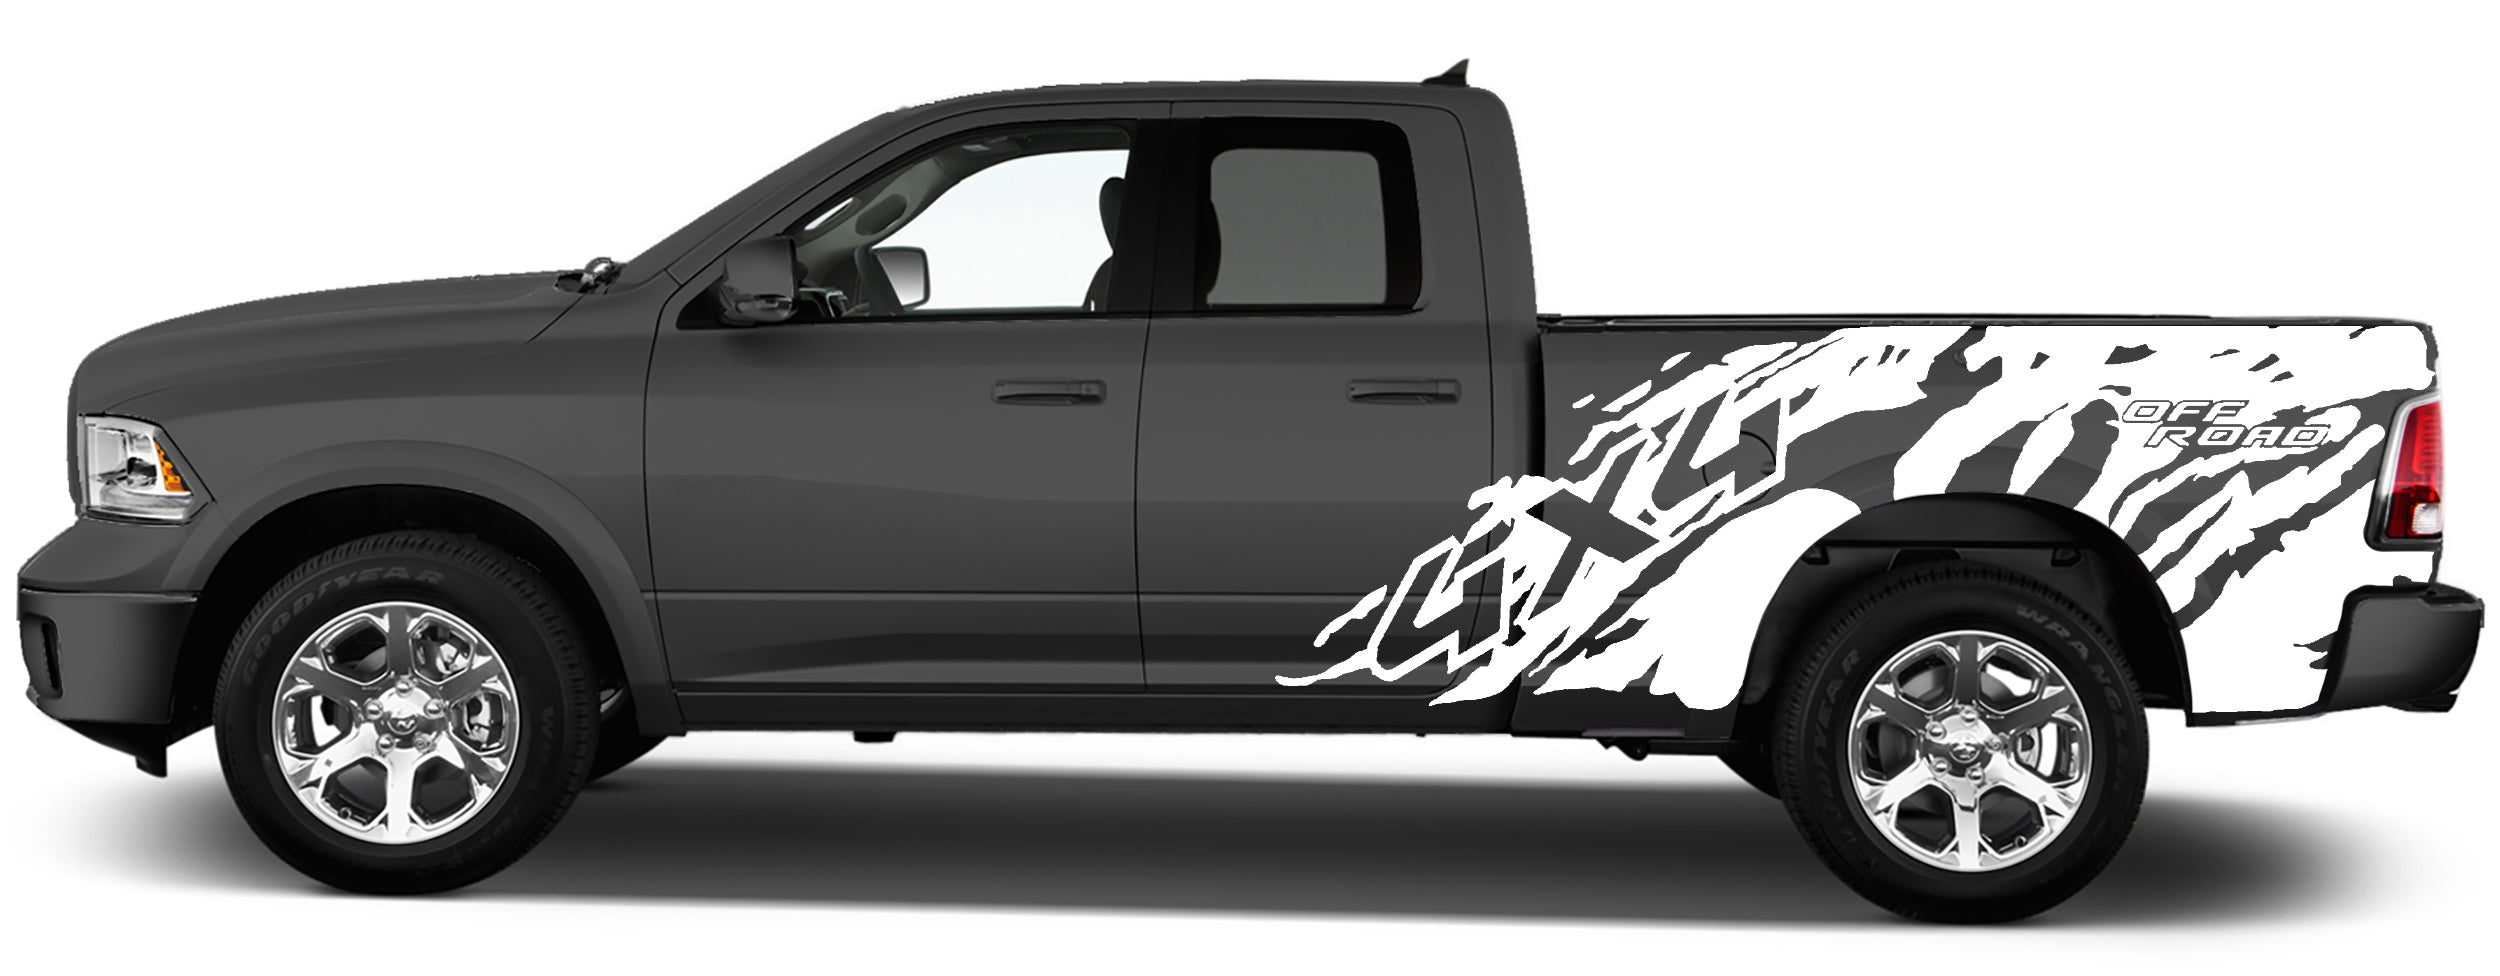 4x4 off road side graphics for dodge ram 2009 to 2018 models white